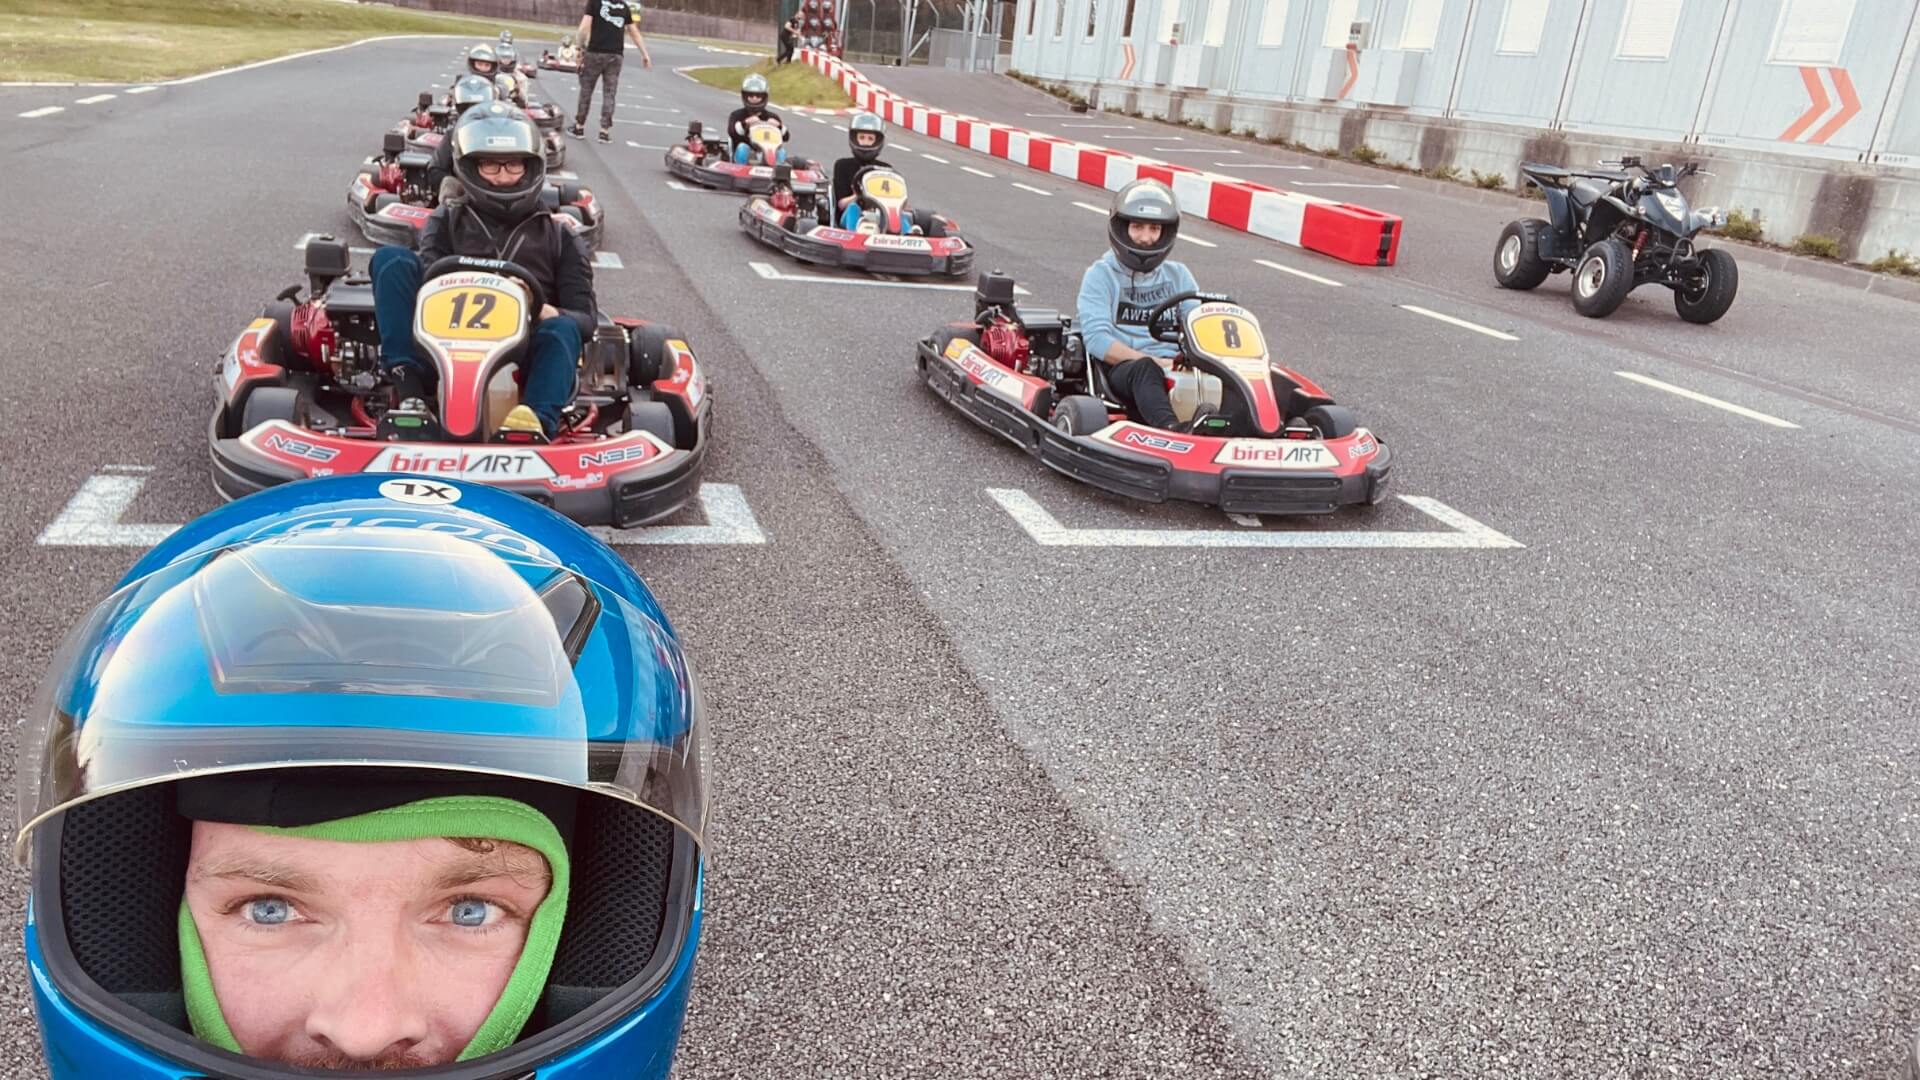 The team went go-karting